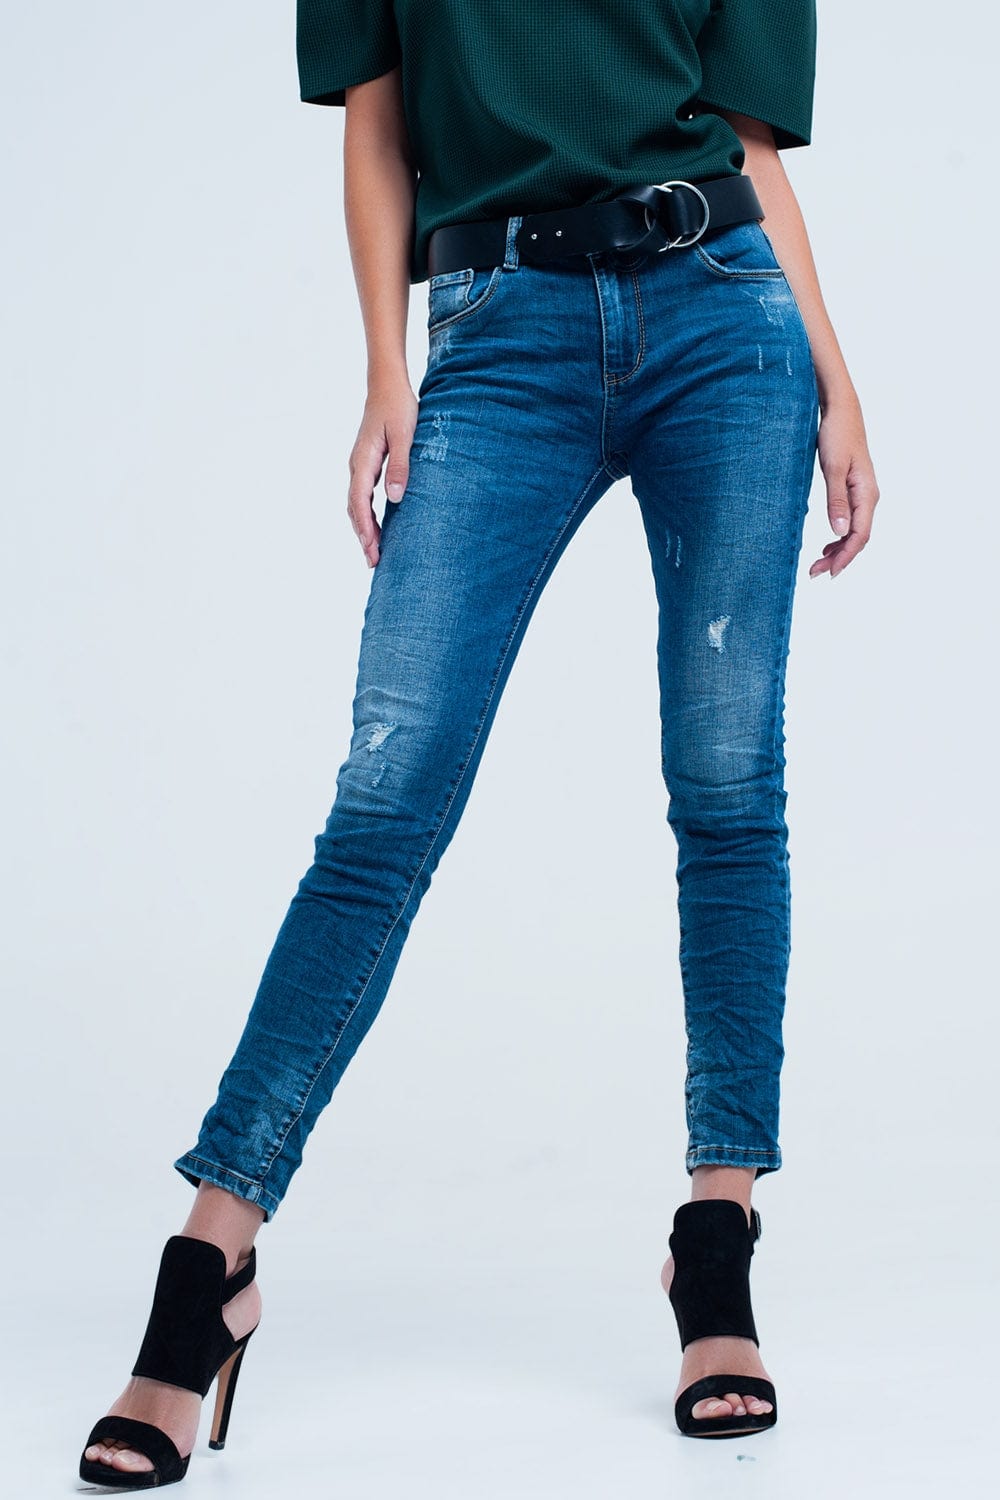 Q2 Jeans Skinny Blue jeans with rips